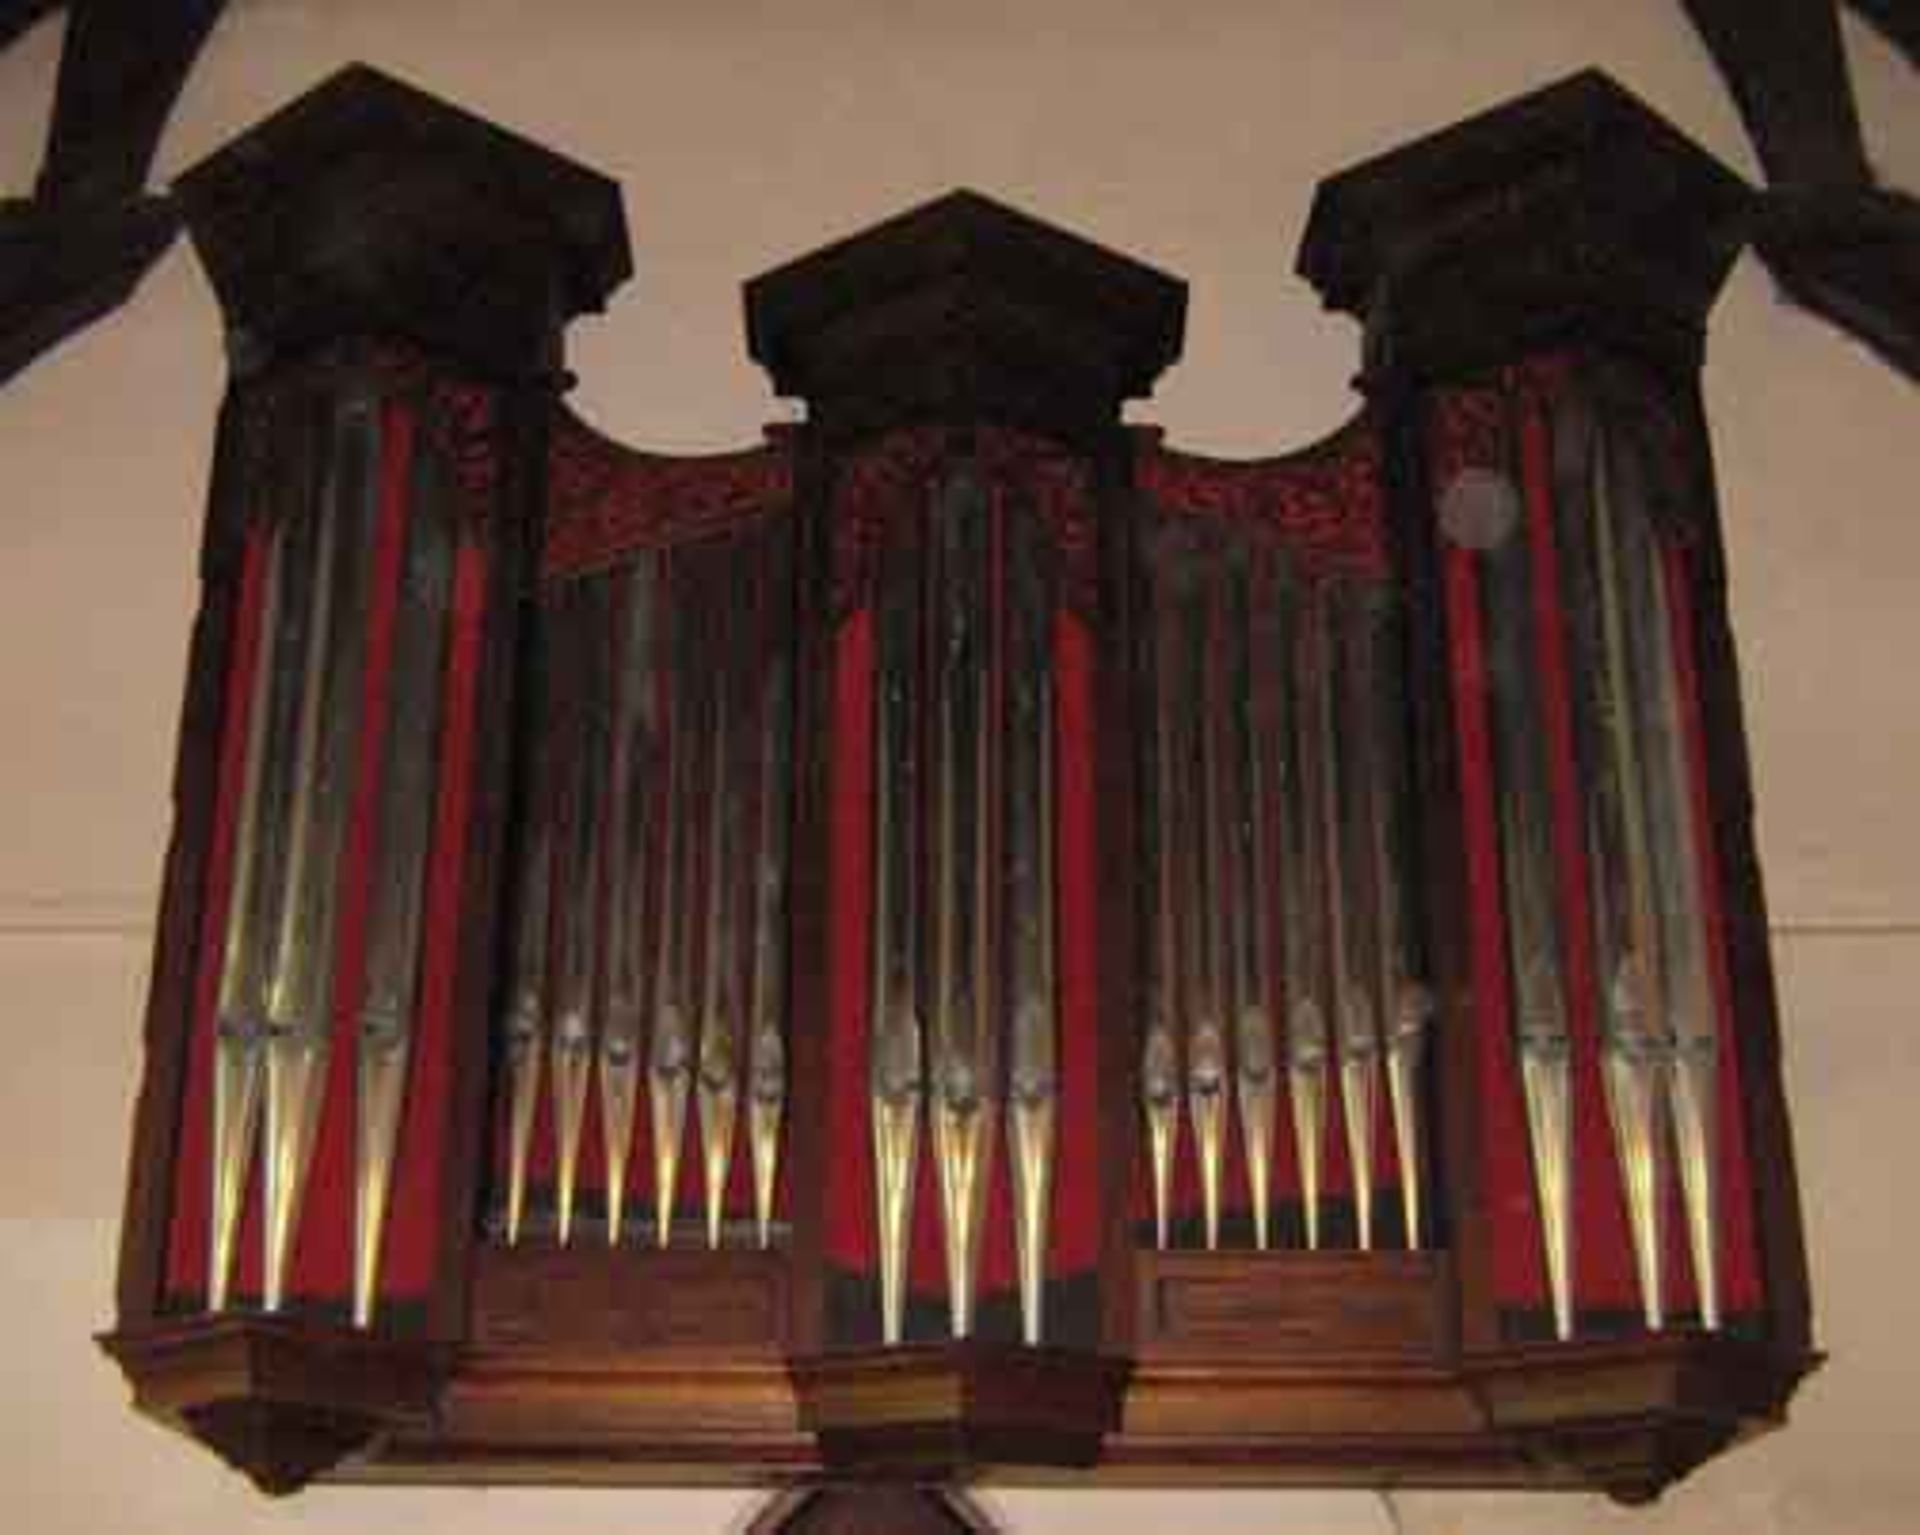 *ORGAN CASE AND PIPES. HEIGHT 2.51M (8.2FT) X WIDTH 3.4M (11.1FT) X DEPTH 1050MM (41.25IN) [0]